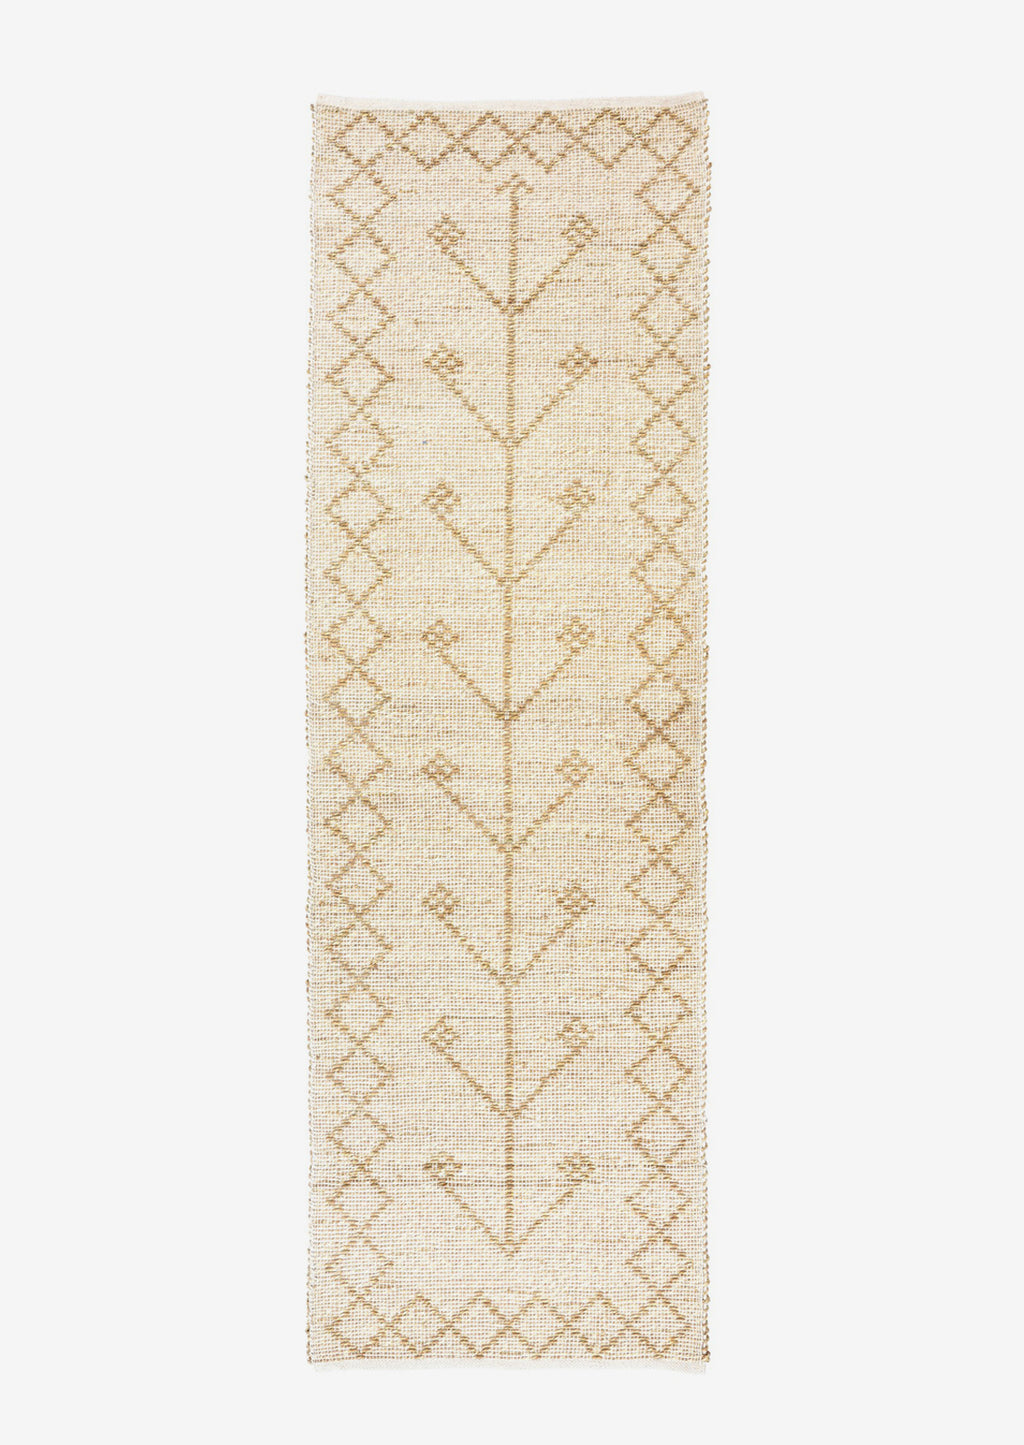 3: A seagrass runner rug in neutral color with talisman pattern and diamond border.